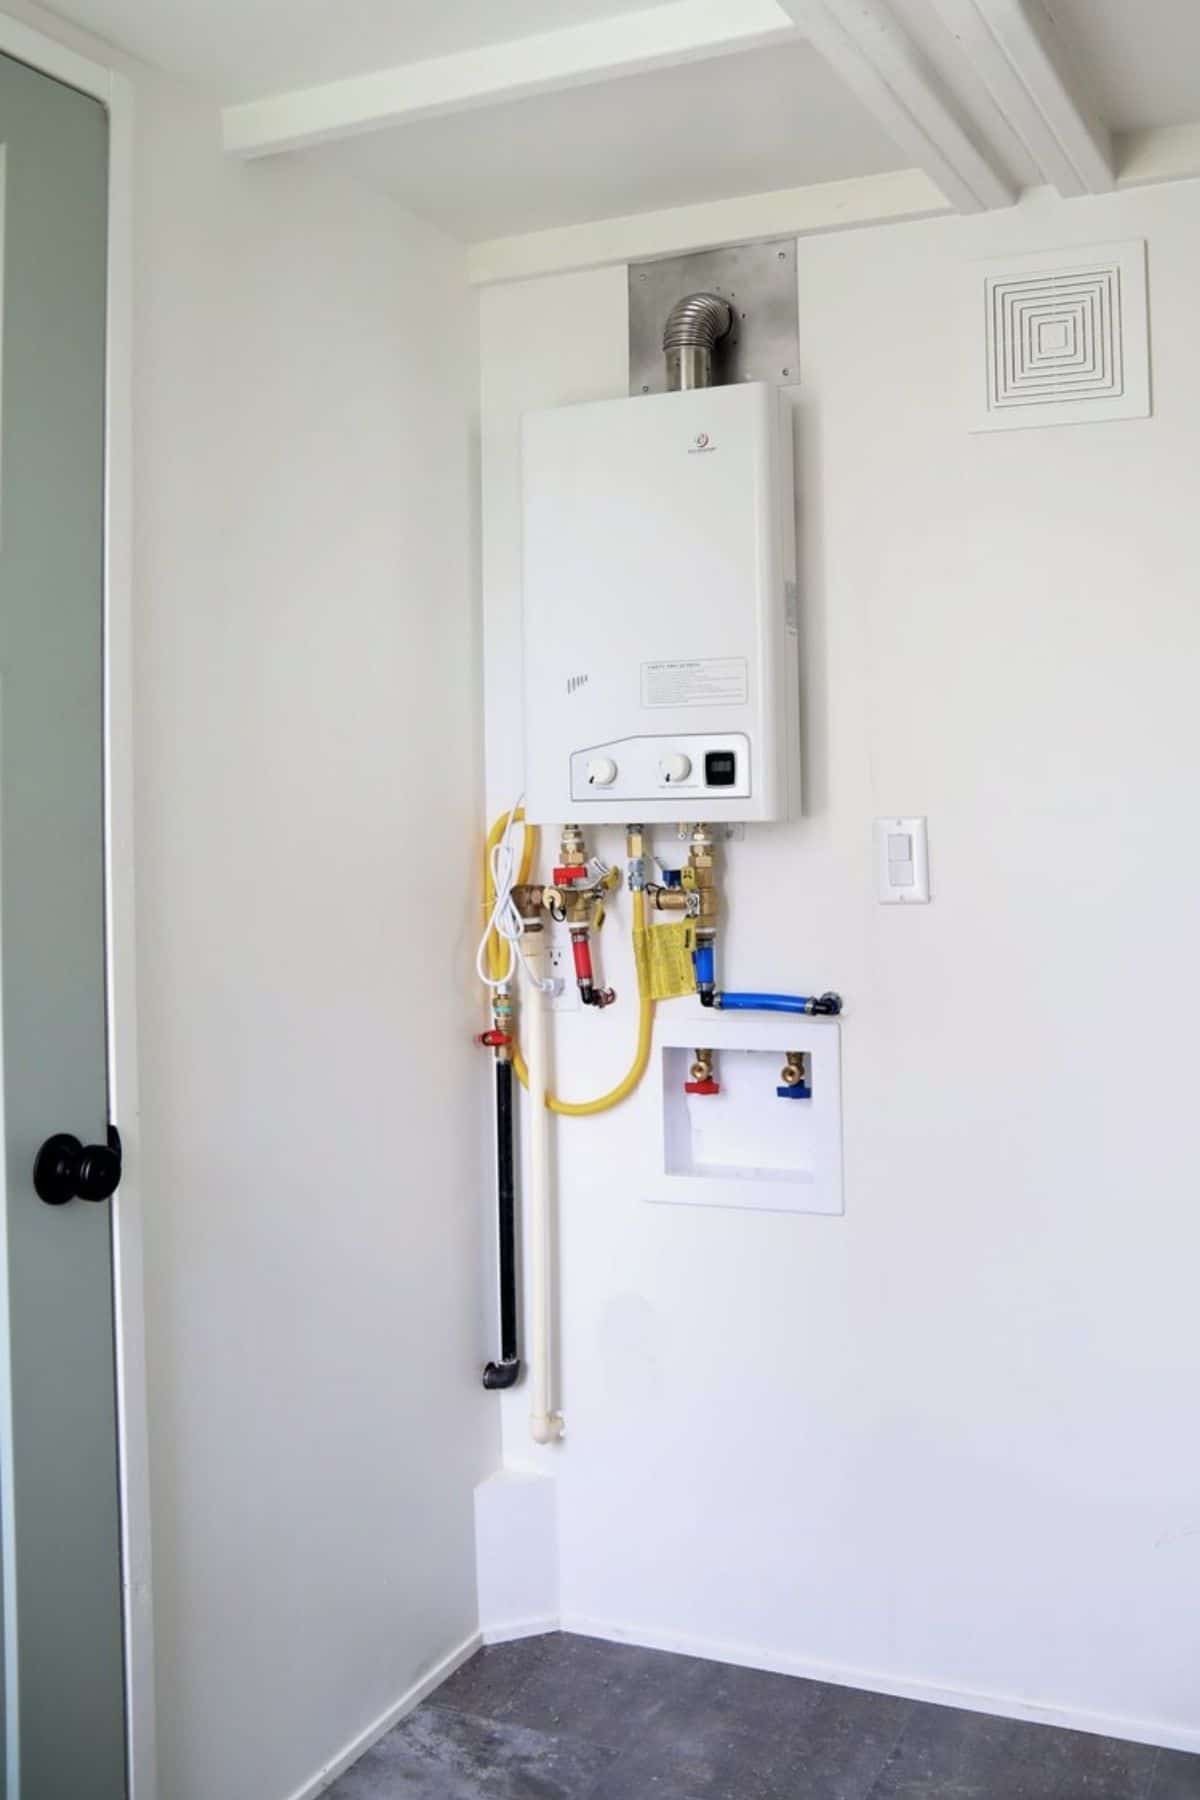 Hot water heater and electrical panel in bathroom